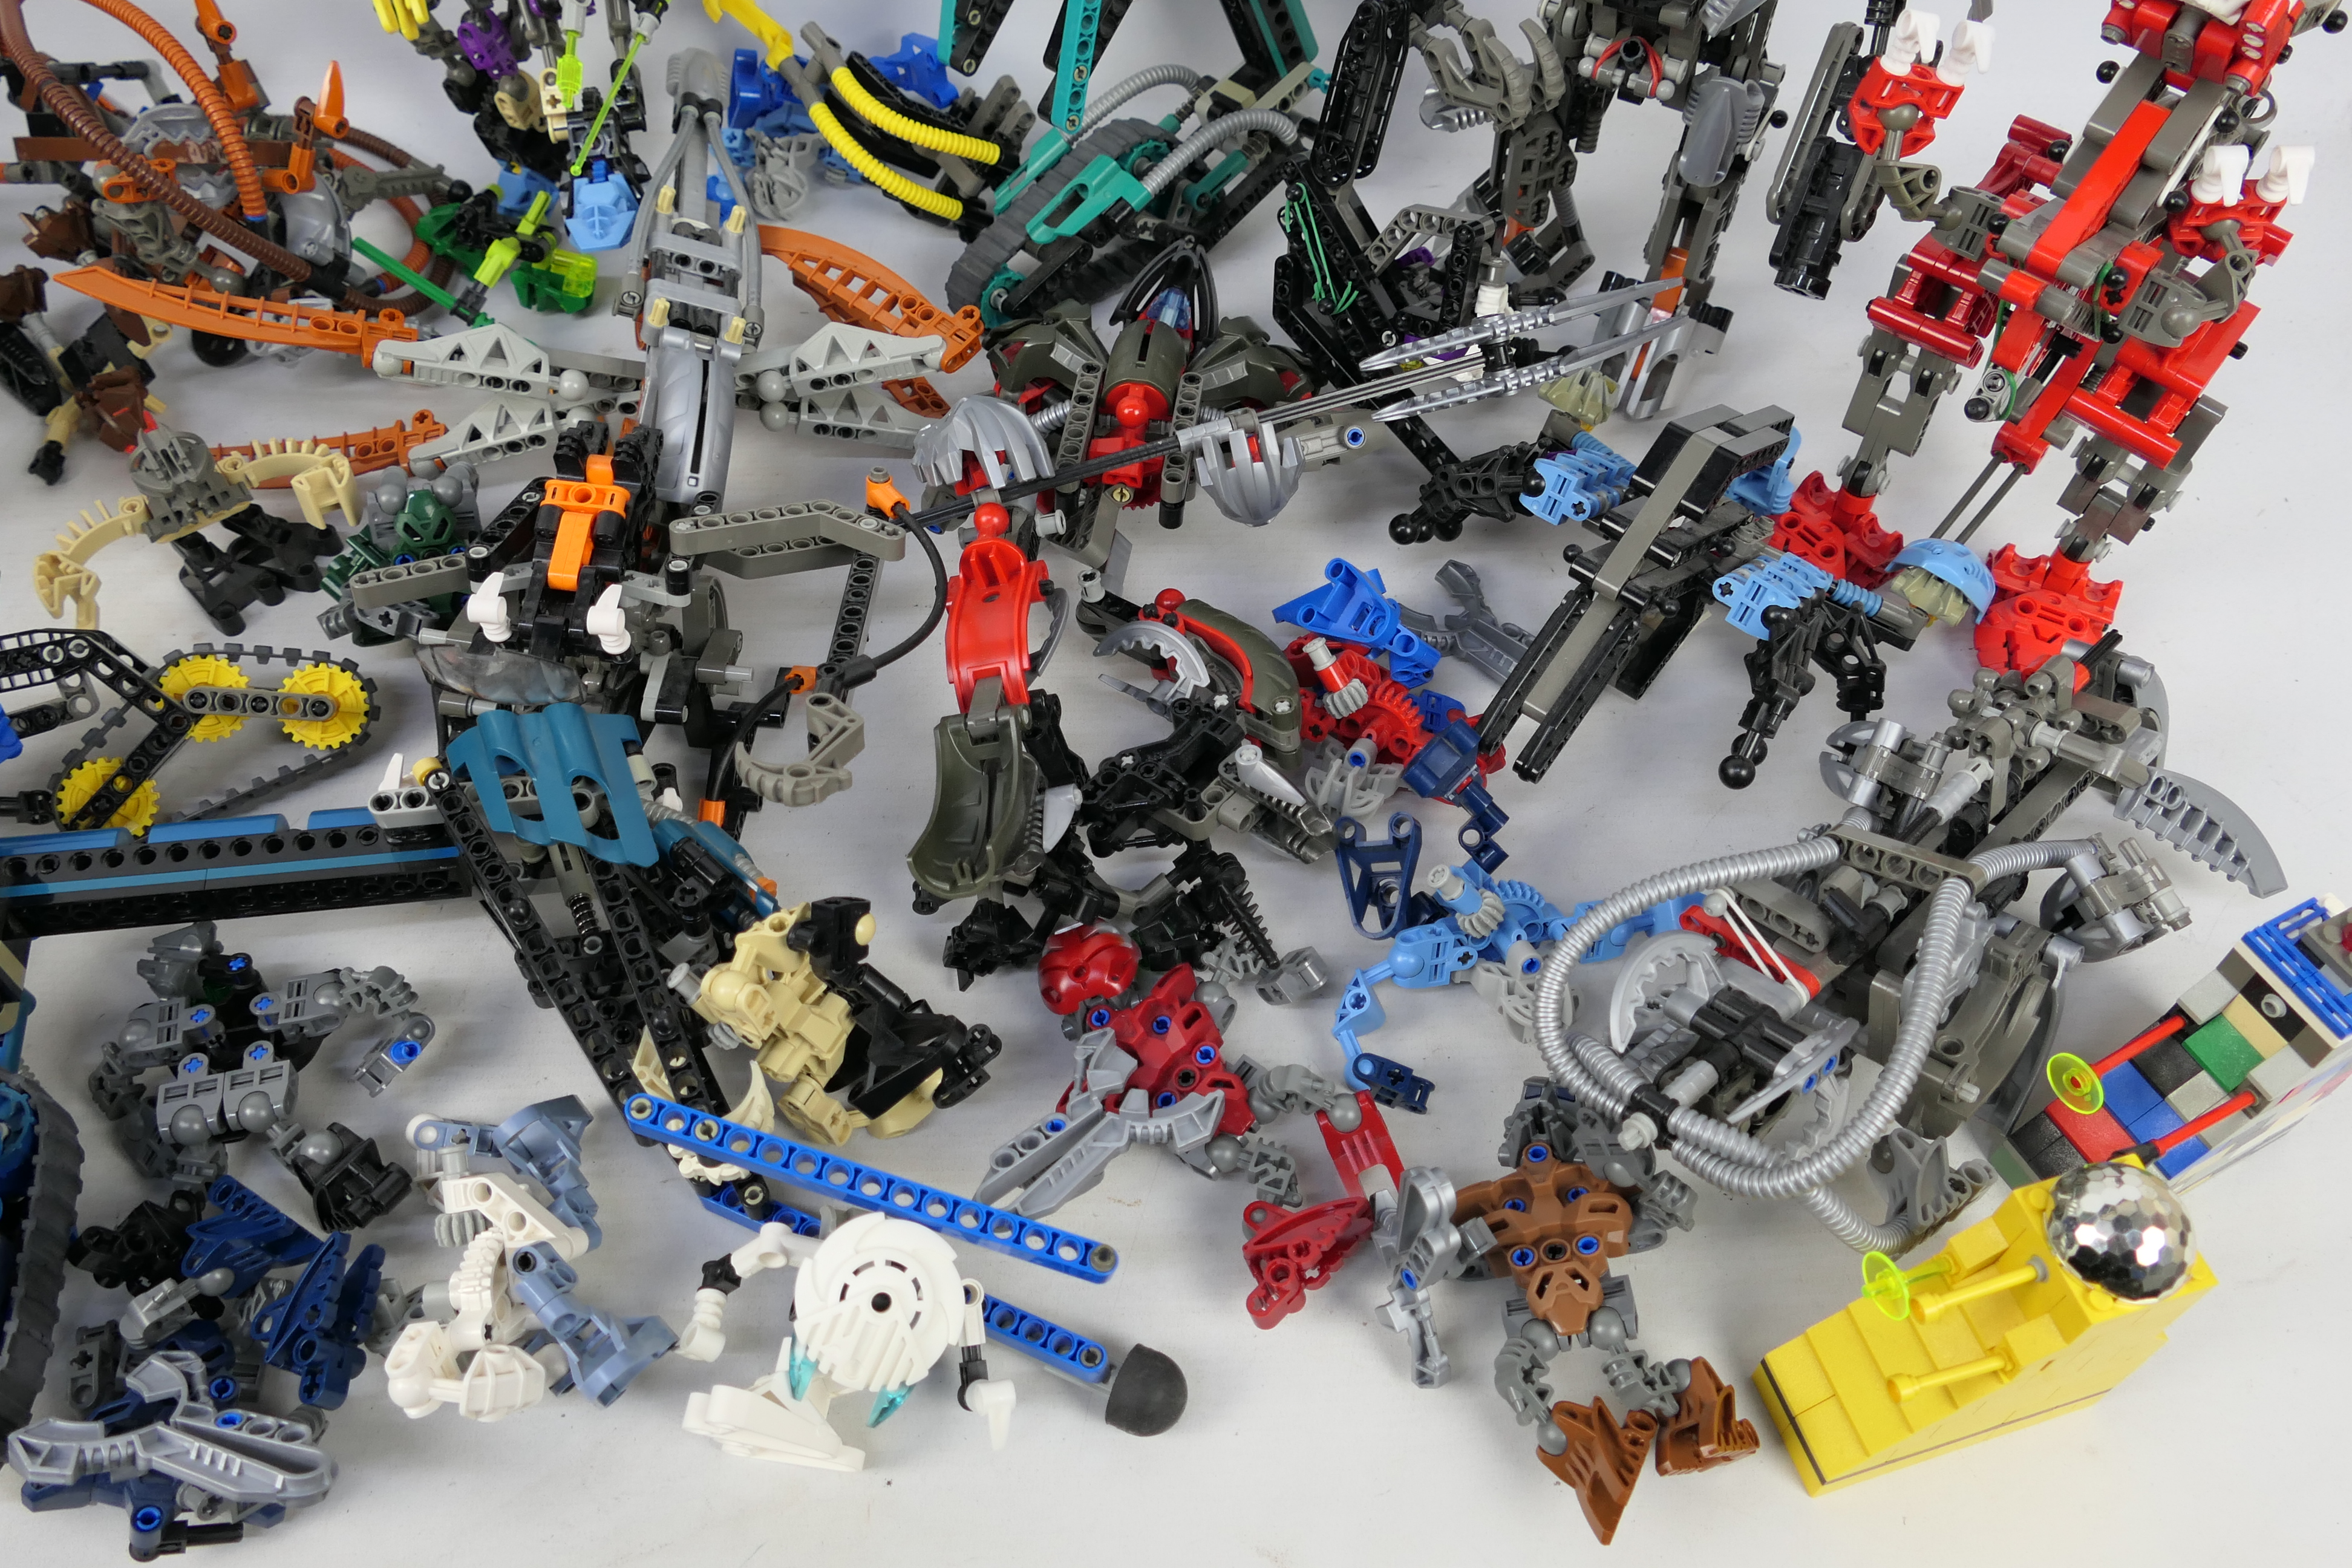 Lego - Bionicles - A collection of unboxed Lego including 15 x large Bionicle figures, - Image 4 of 7